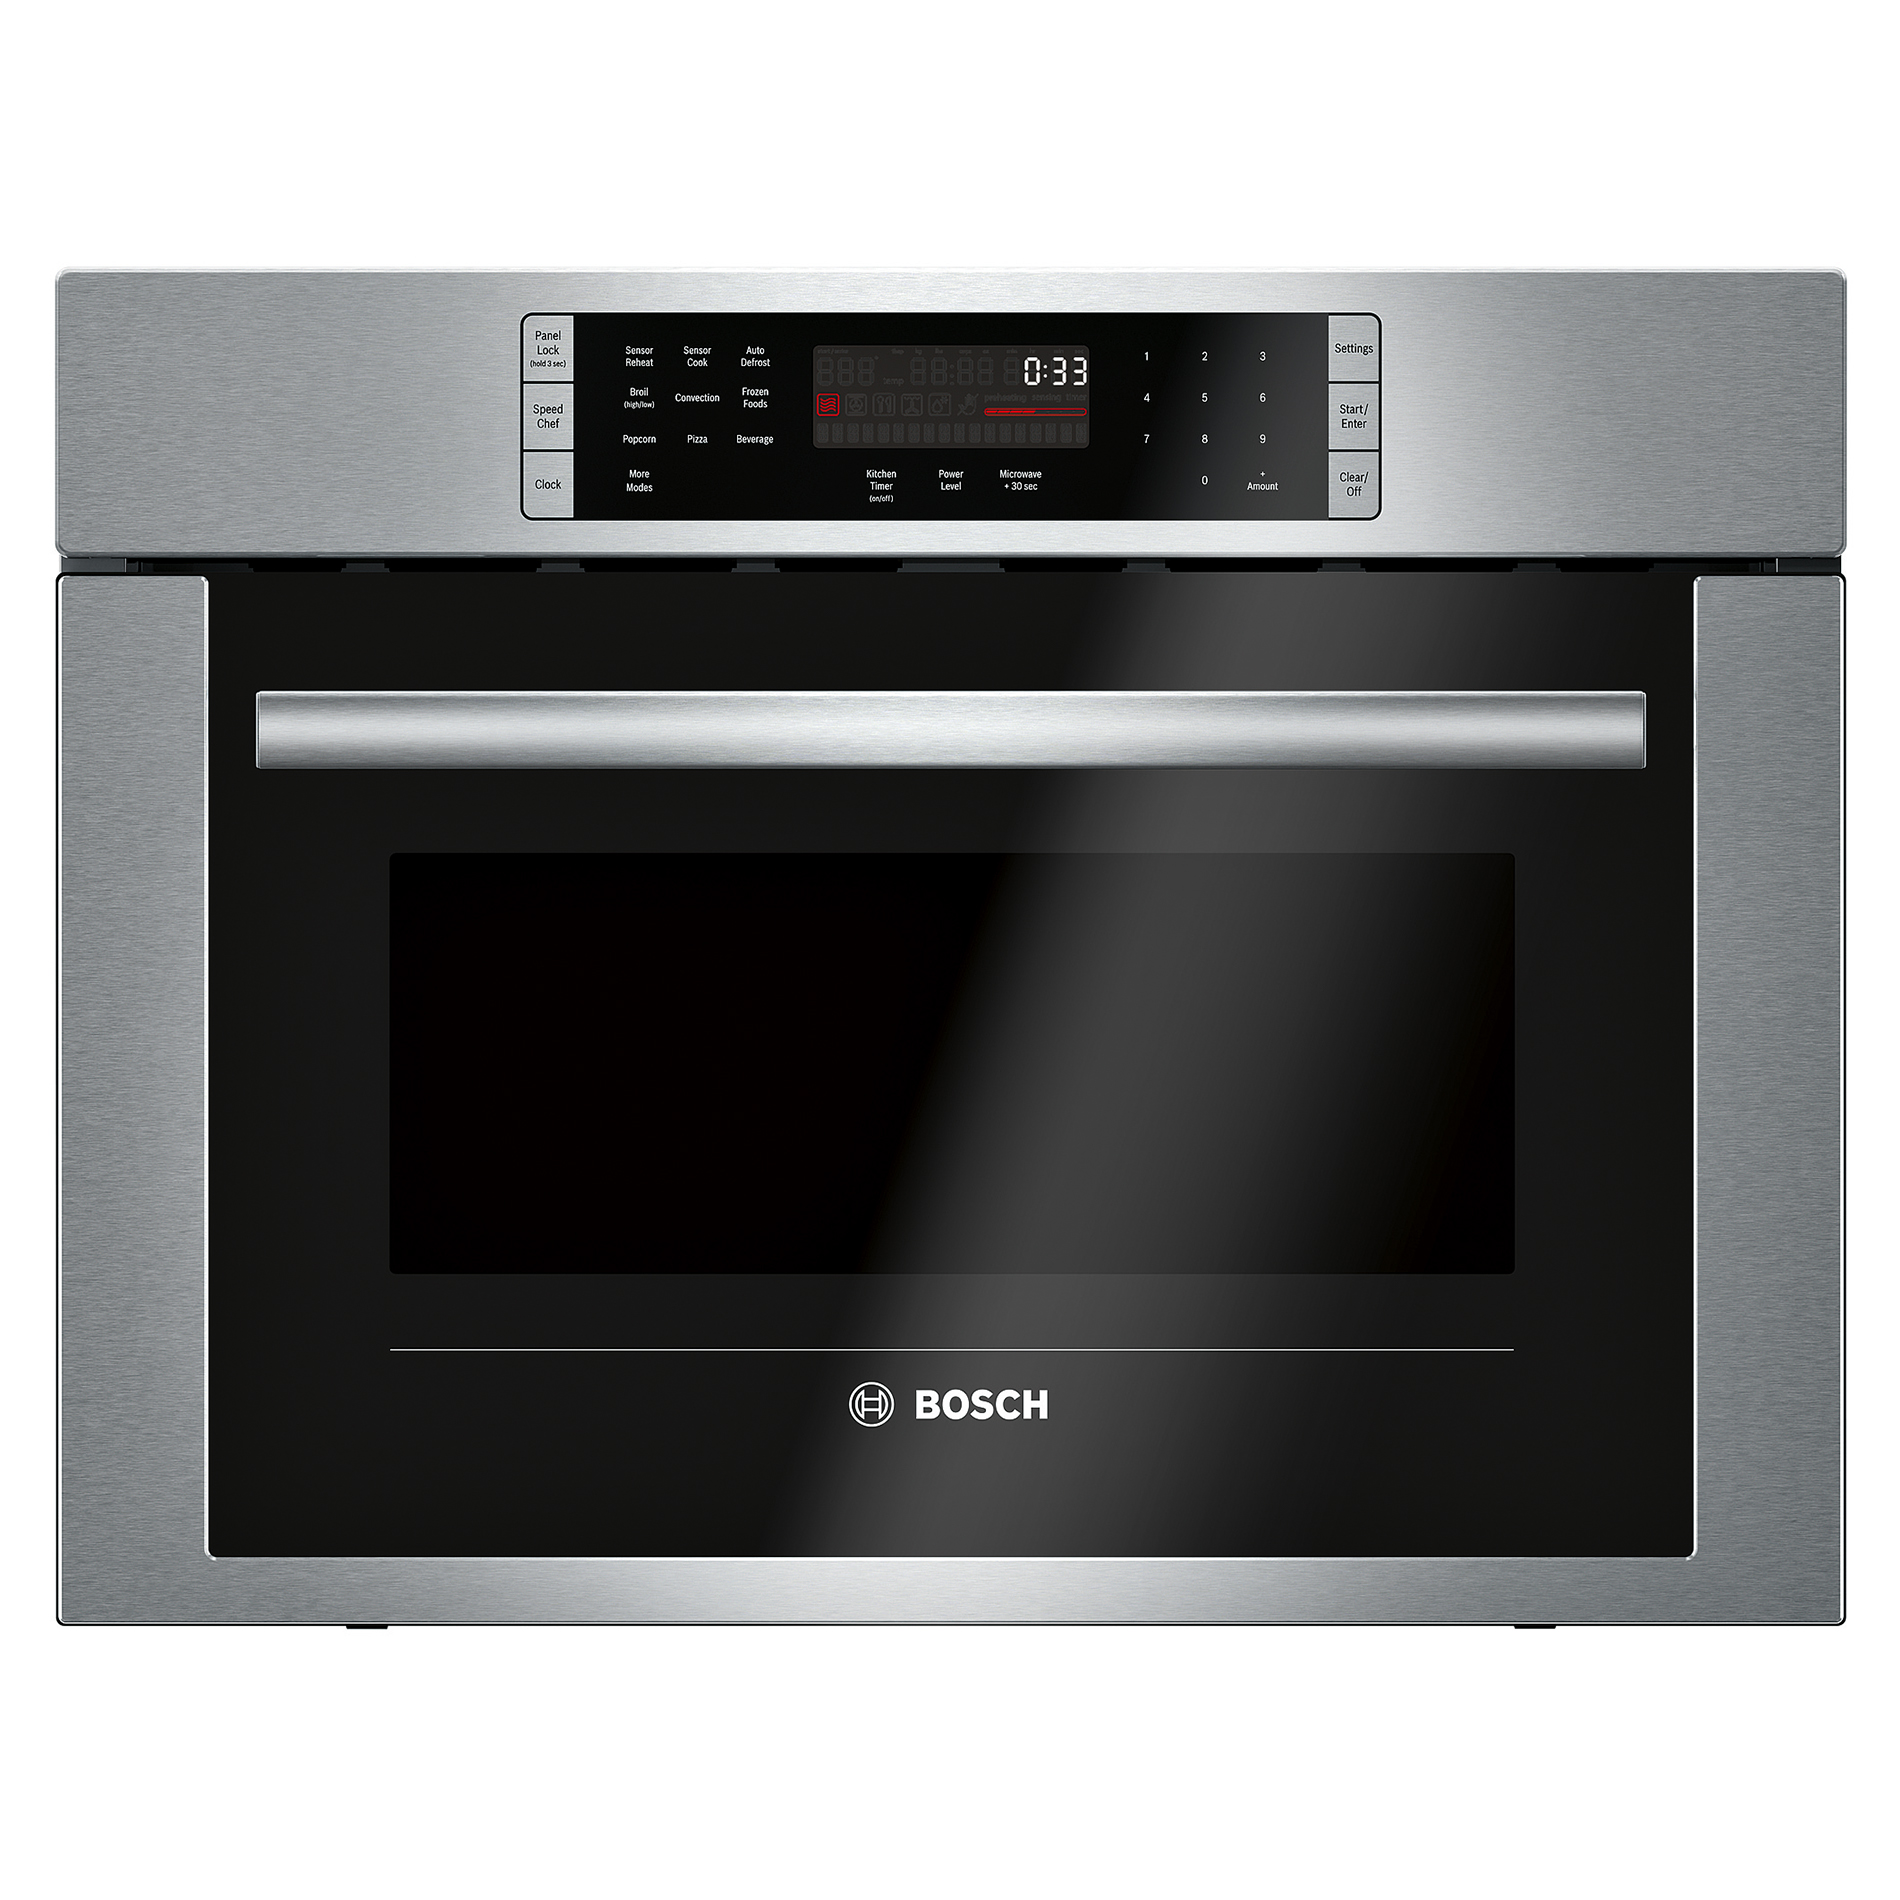 What is a good microwave convection oven for a small family?